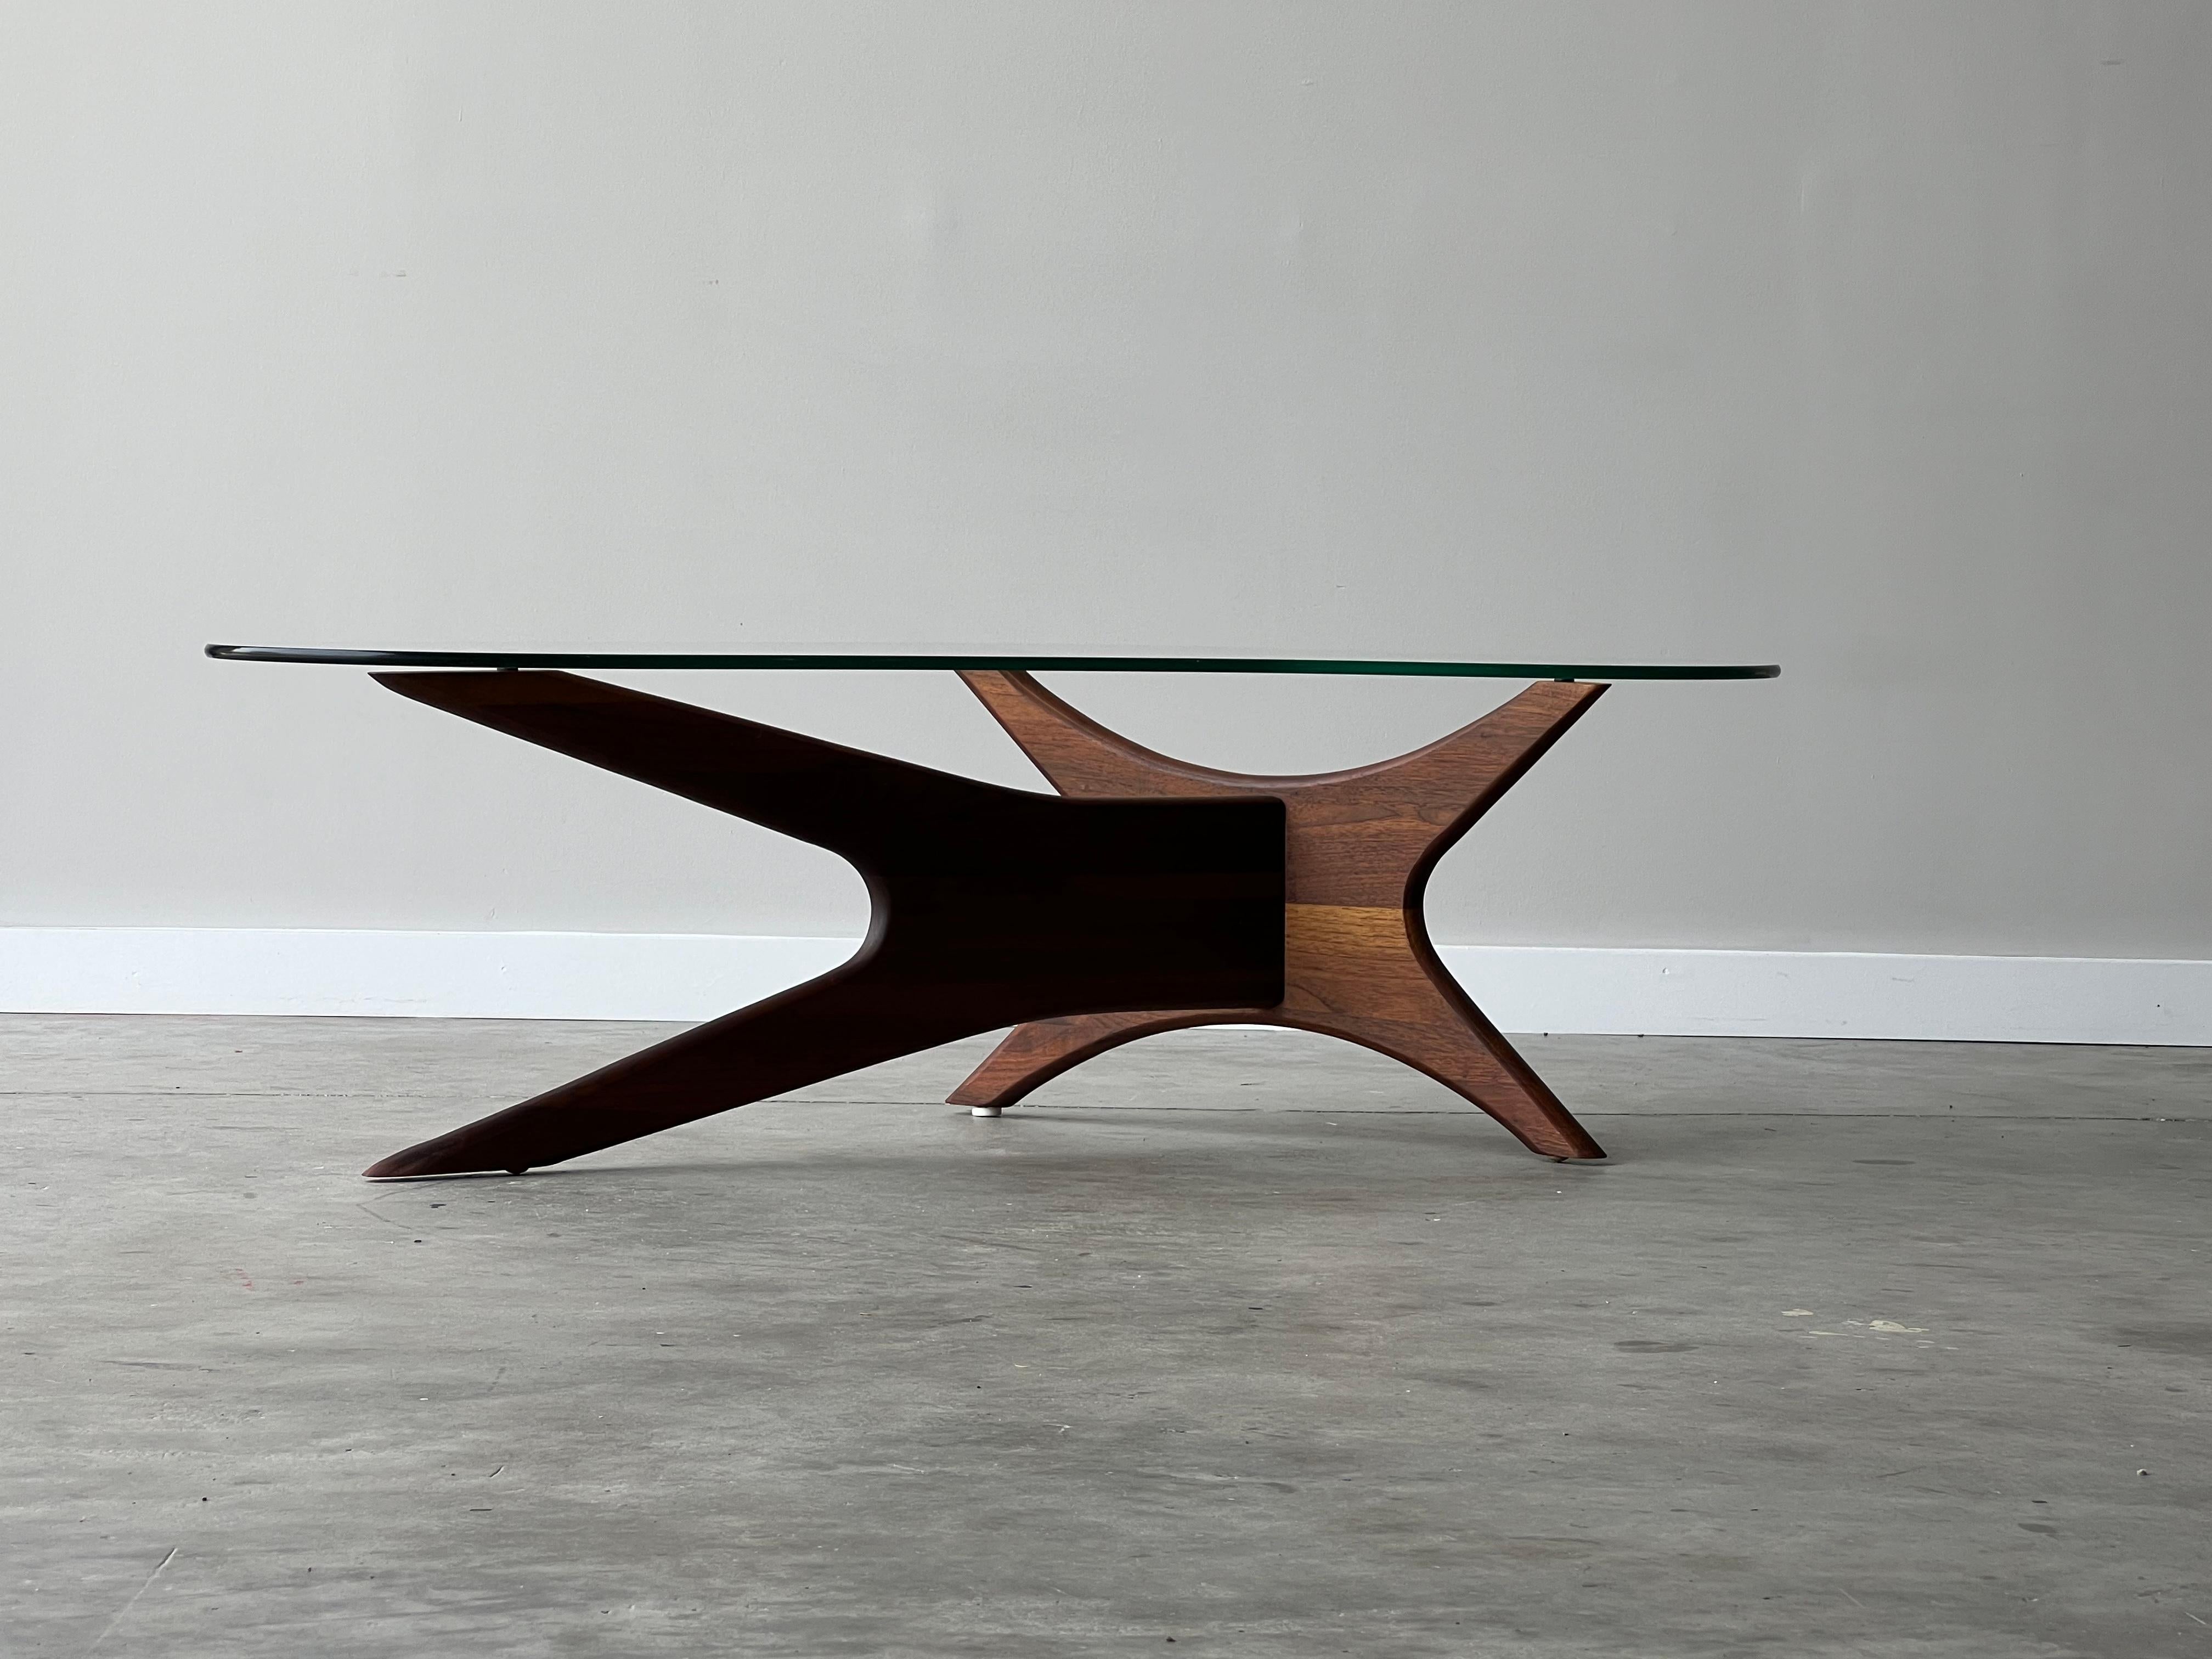 Mid-century Adrian Pearsall kidney shaped sculptural coffee table. Beautiful craftsmanship and glass shape. Base of the table is made from sculpted walnut and the glass top works cohesively with the base. Can transform your interior with beautiful